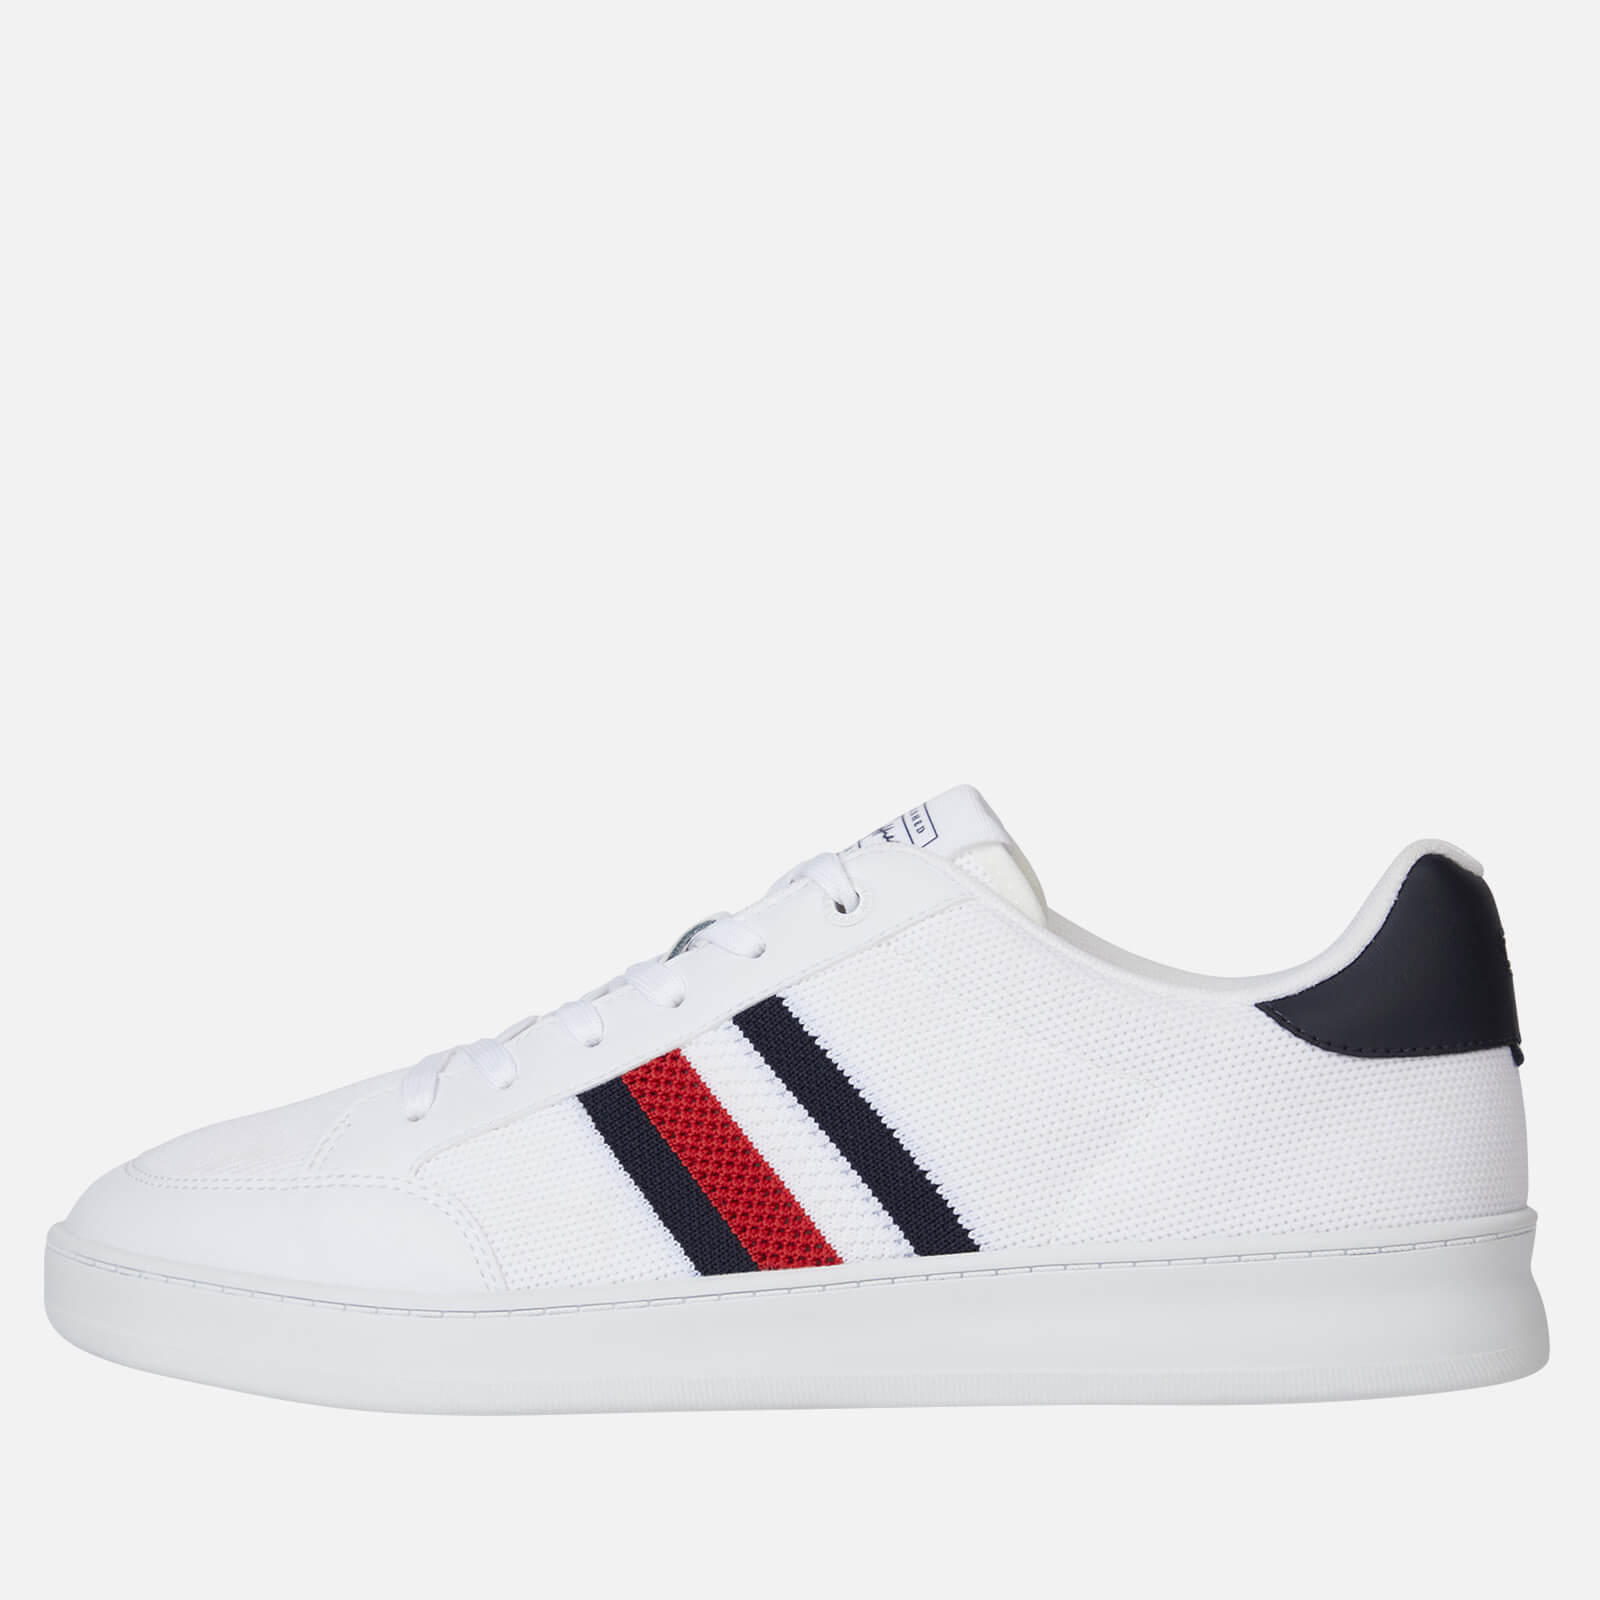 Tommy Hilfiger Men's Faux Leather and Mesh Trainers - UK 7